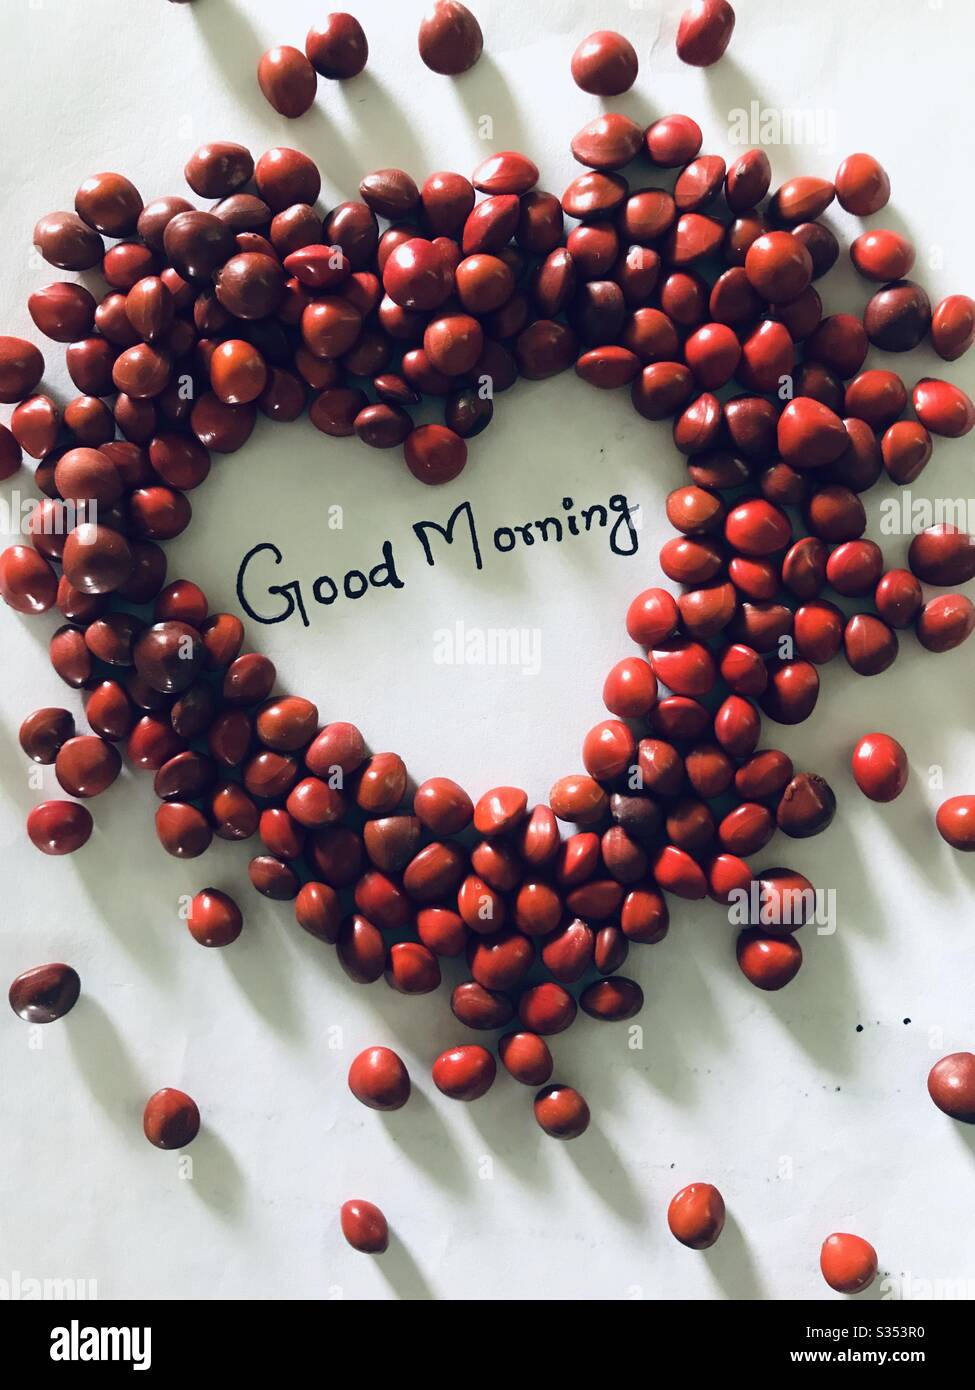 Adenanthera red beads in shape of heart with words Good Morning hand written, with white surface background. Morning message for friends,Manjadikuru in malayalam, dramatic look with multiple shades Stock Photo